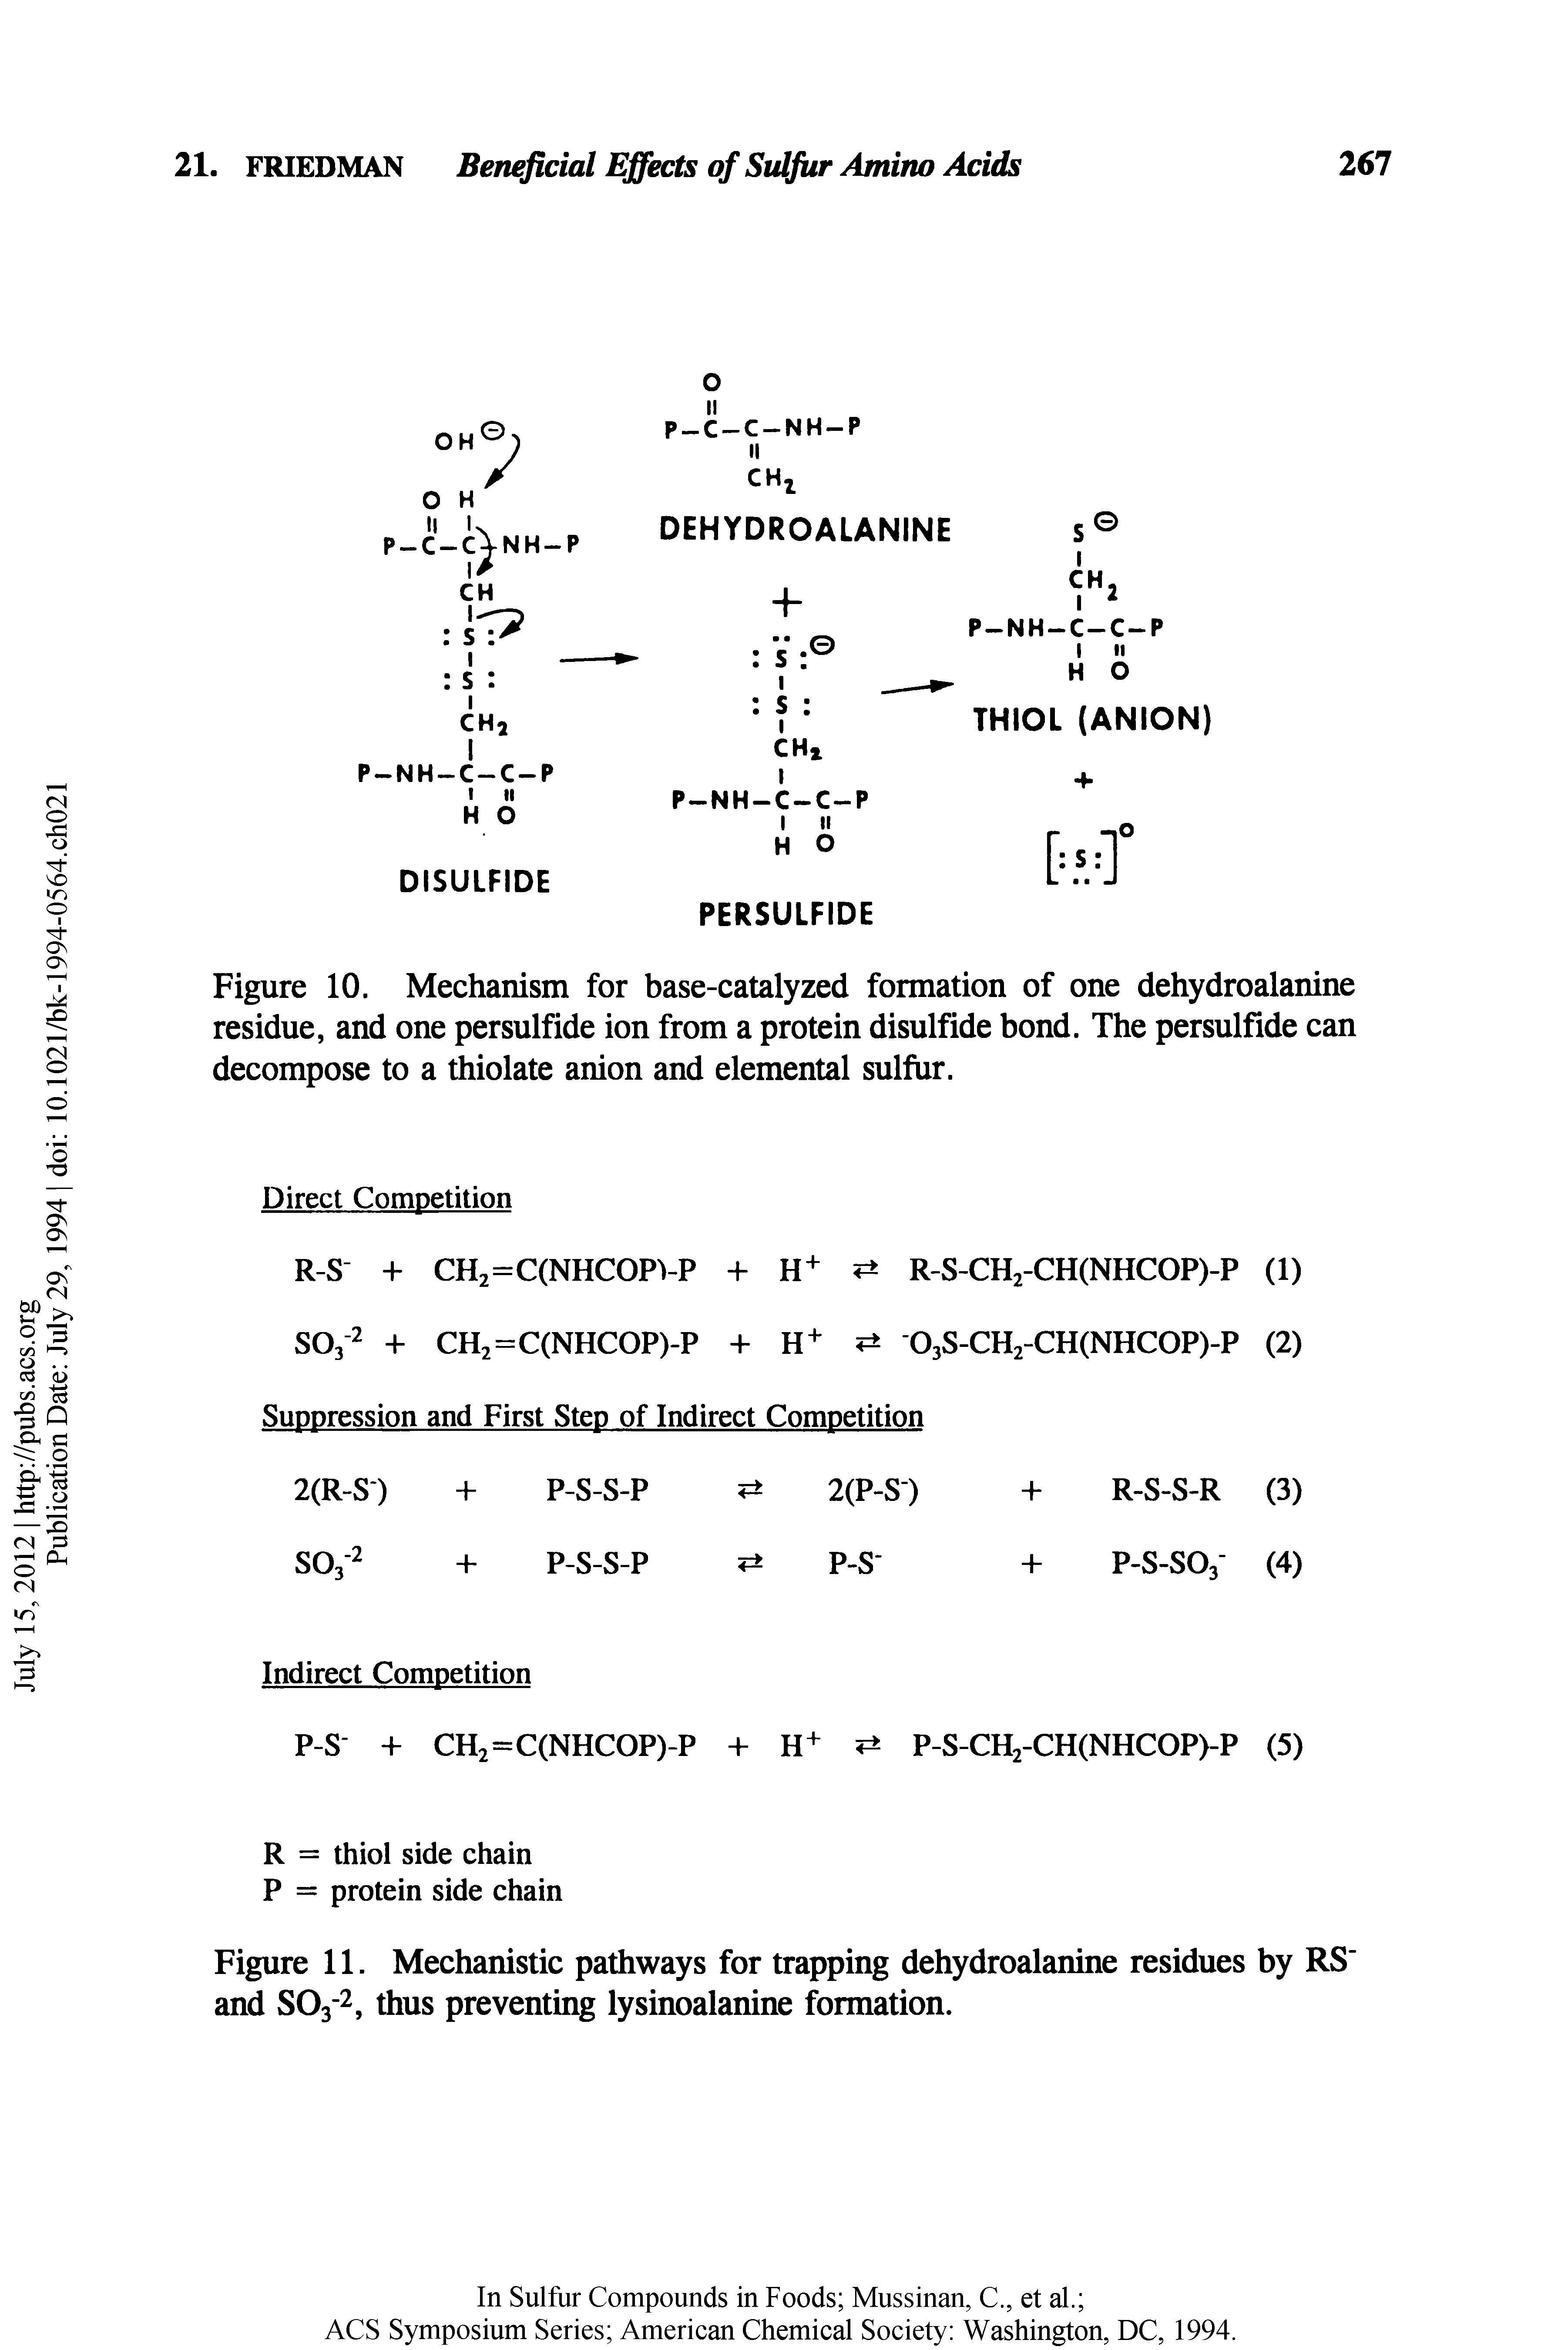 Figure 11. Mechanistic pathways for trapping dehydroalanine residues by RS and SO3-2, thus preventing lysinoalanine formation.